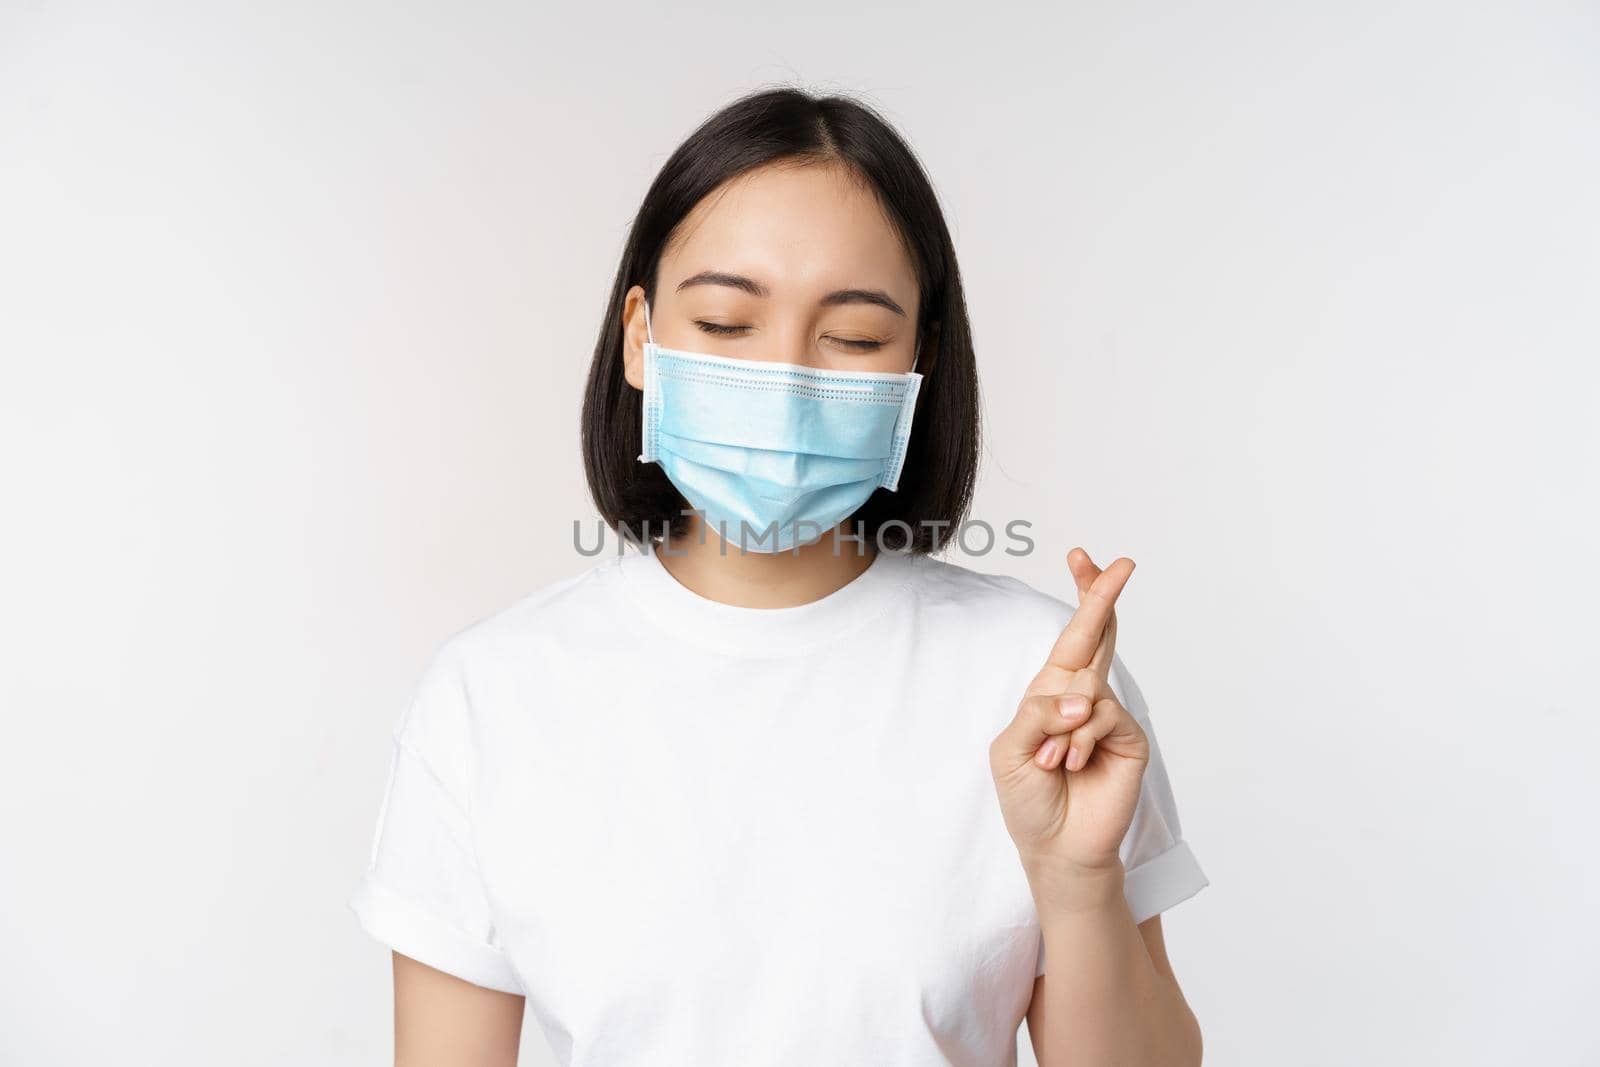 Covid-19, healthcare and medical concept. Image of asian girl in medical face mask, cross fingers, praying, making wish and smiling, standing over white background.